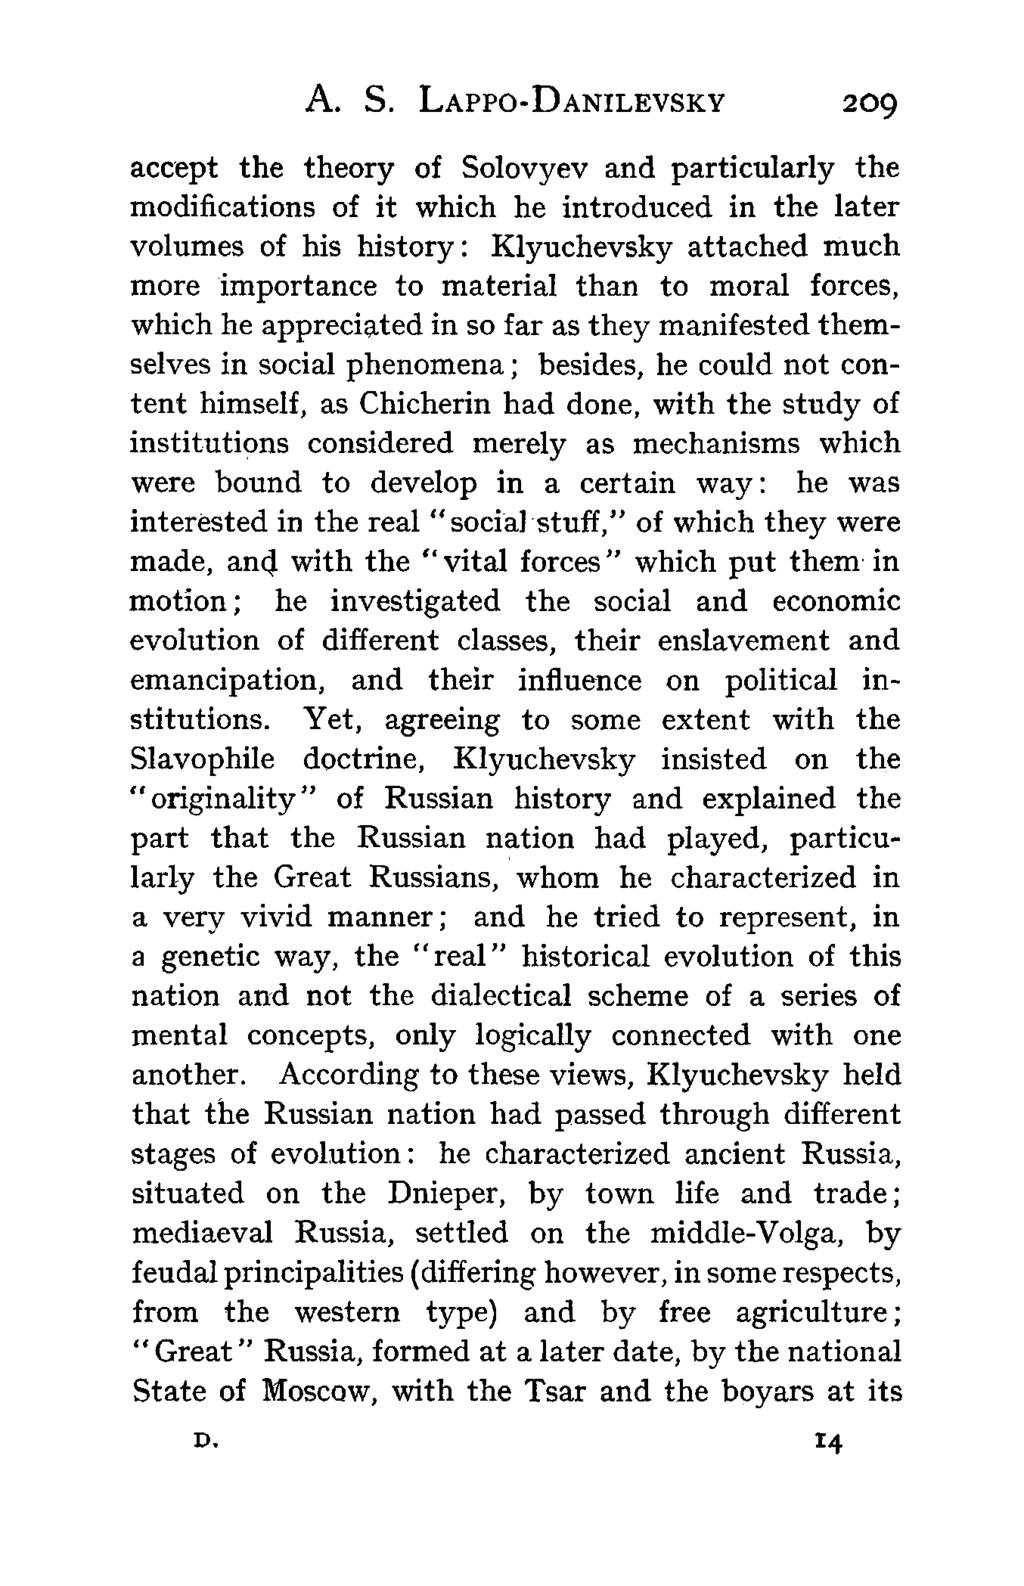 A. S. LAPPO-DANILEVSKY 209 accept the theory of Solovyev and particularly the modifications of it which he introduced in the later volumes of his history: Klyuchevsky attached much more importance to